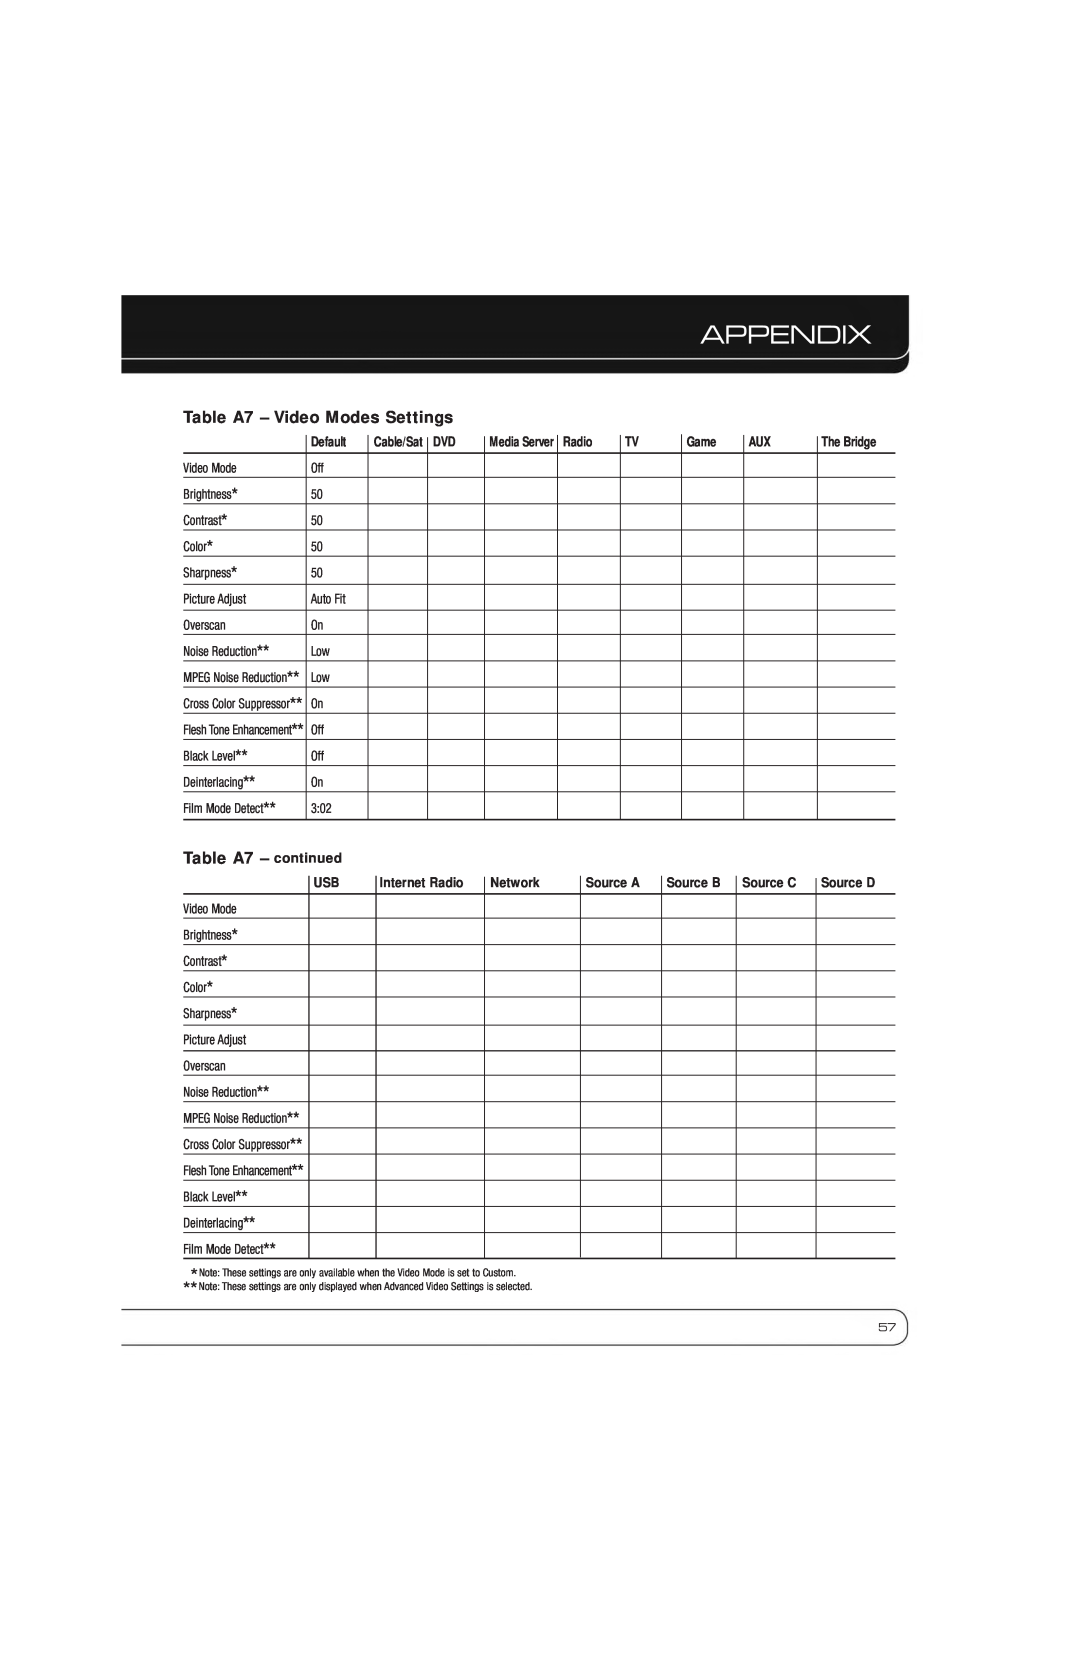 Harman-Kardon AVR 7550HD owner manual Table A7 - Video Modes Settings, Table A7 - continued, Appendix 